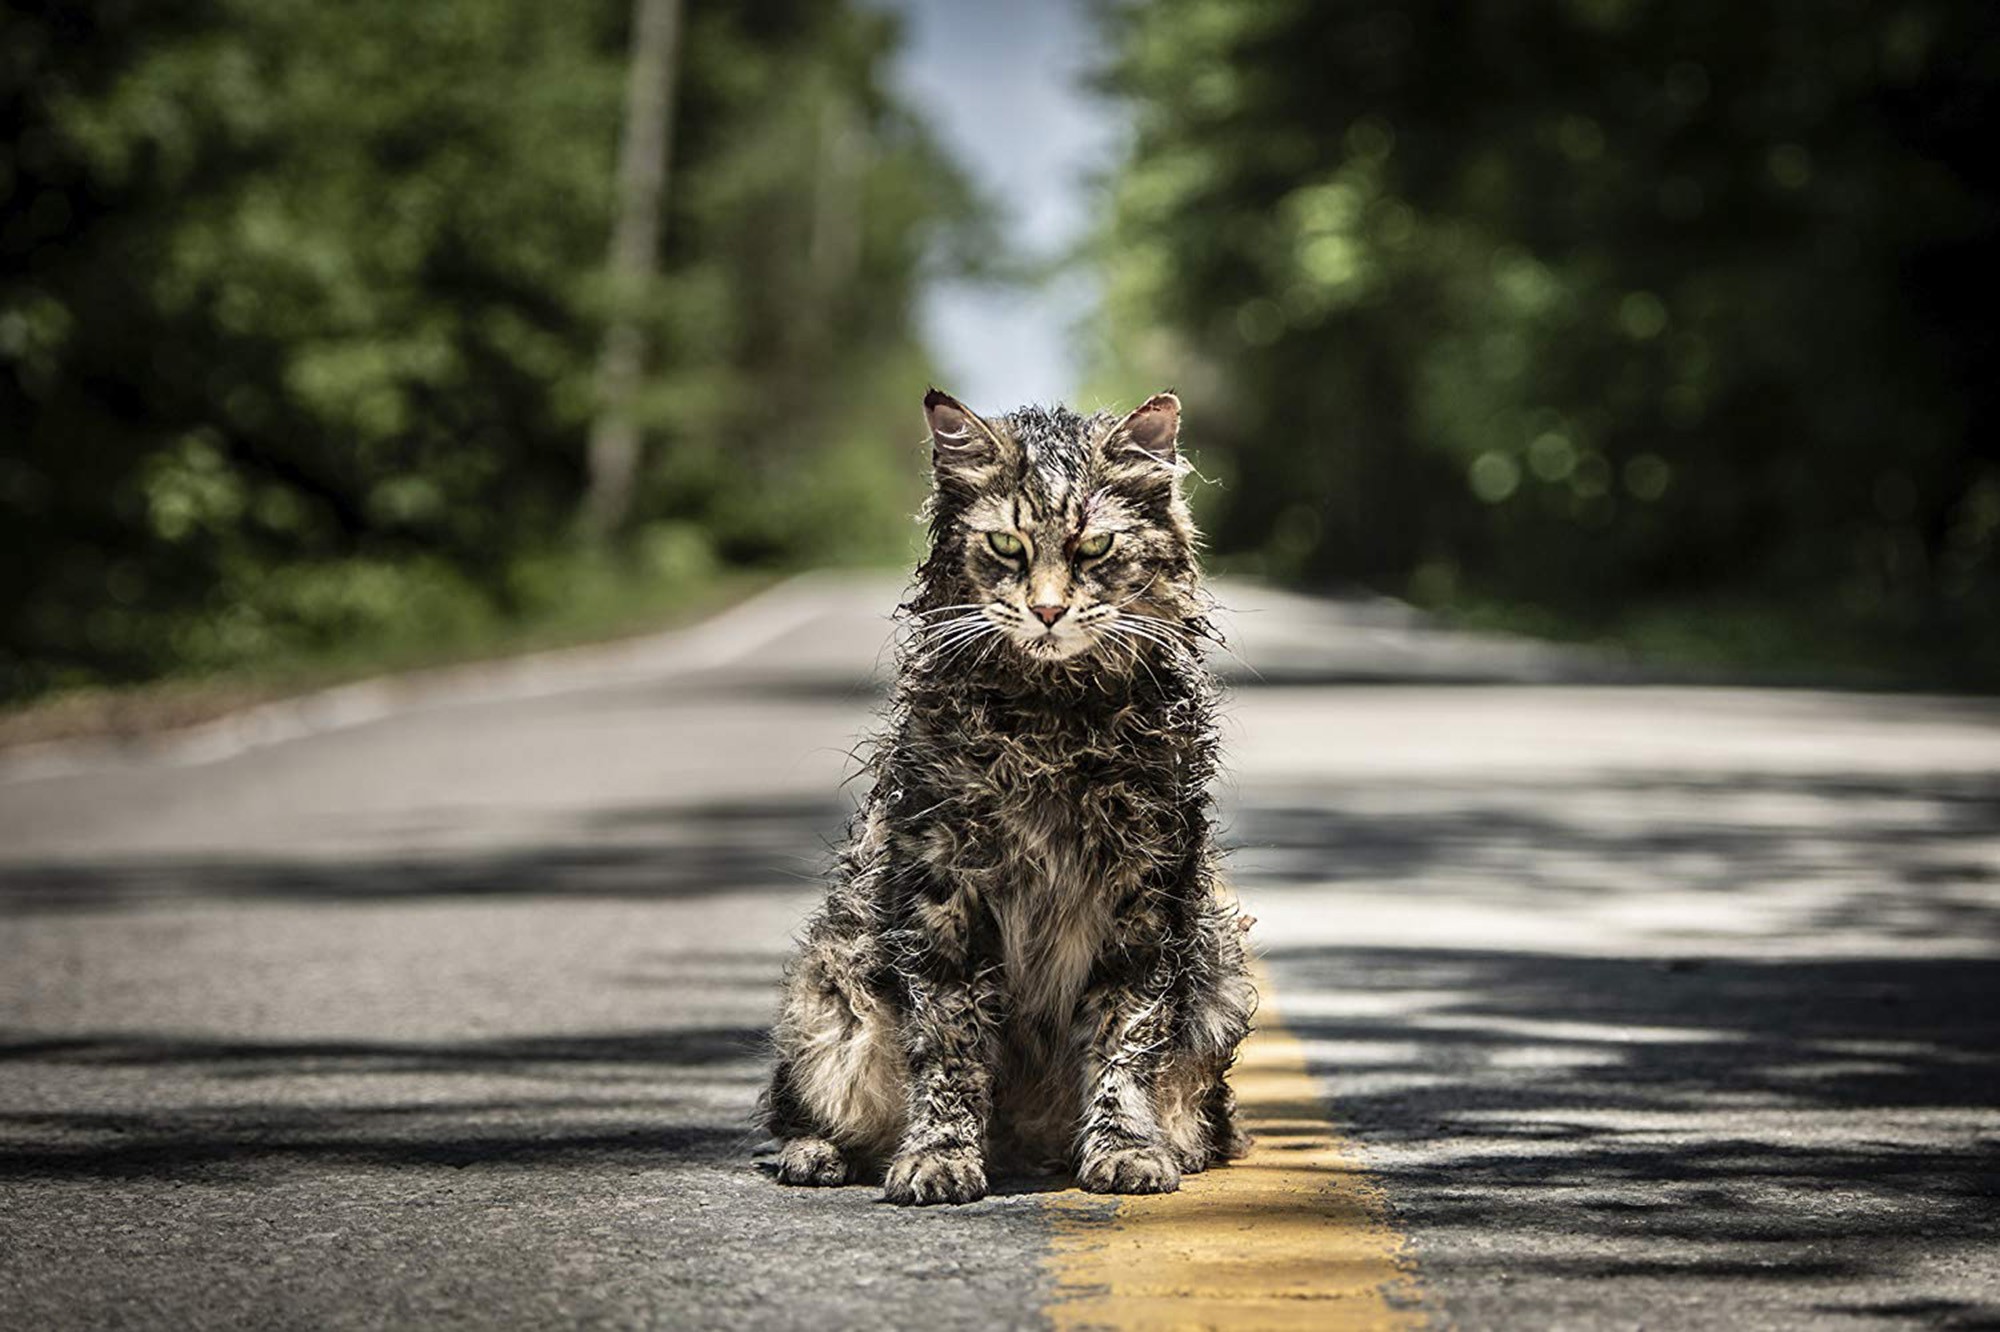 Church the cat from “Pet Sematary”. Leo, one of the felines who played Church, died a month after the film's release. Photo: Paramount Pictures